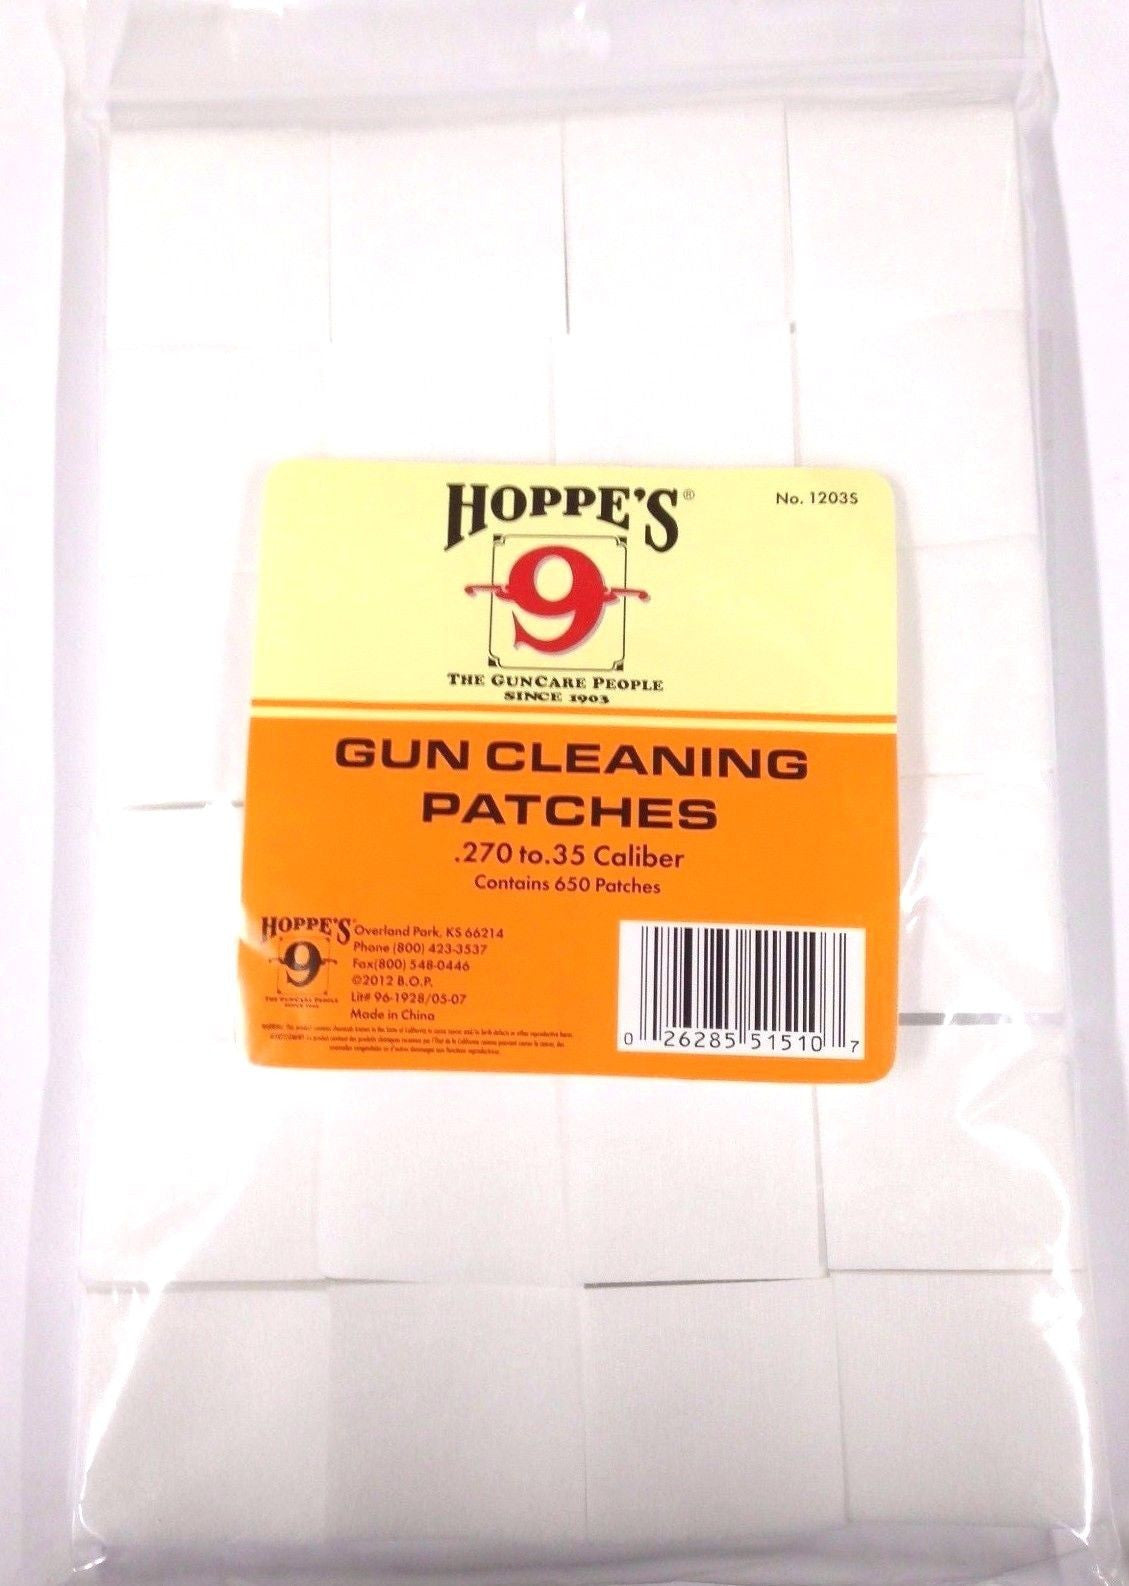 Hoppe's No. 9 Gun Cleaning Patches for .270-.35 Caliber (650 Pack)